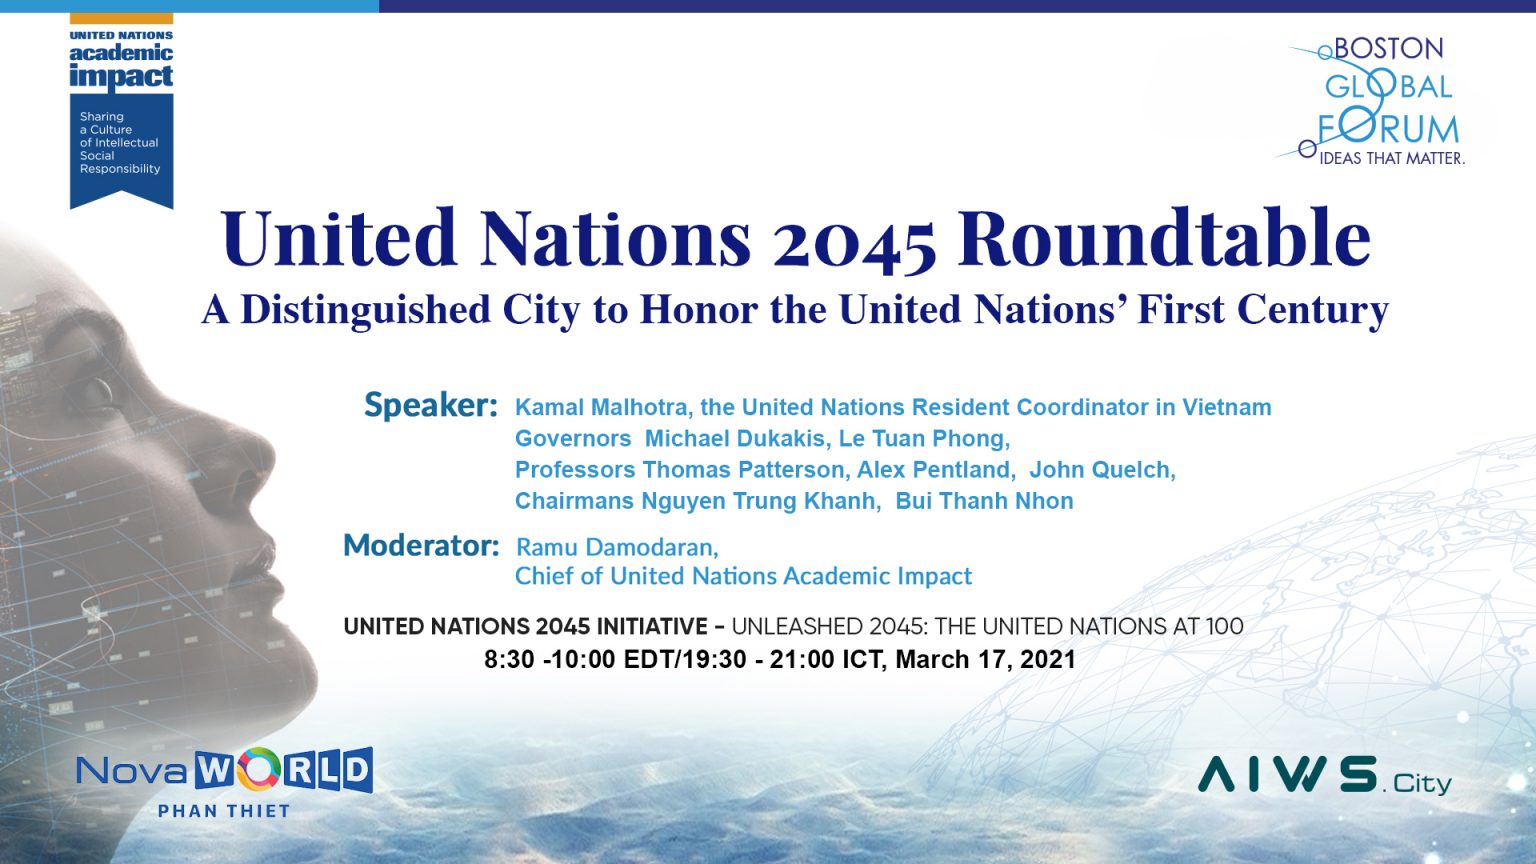 United Nations 2045 Roundtable: A Distinguished City to Honor the United Nations’ First Century